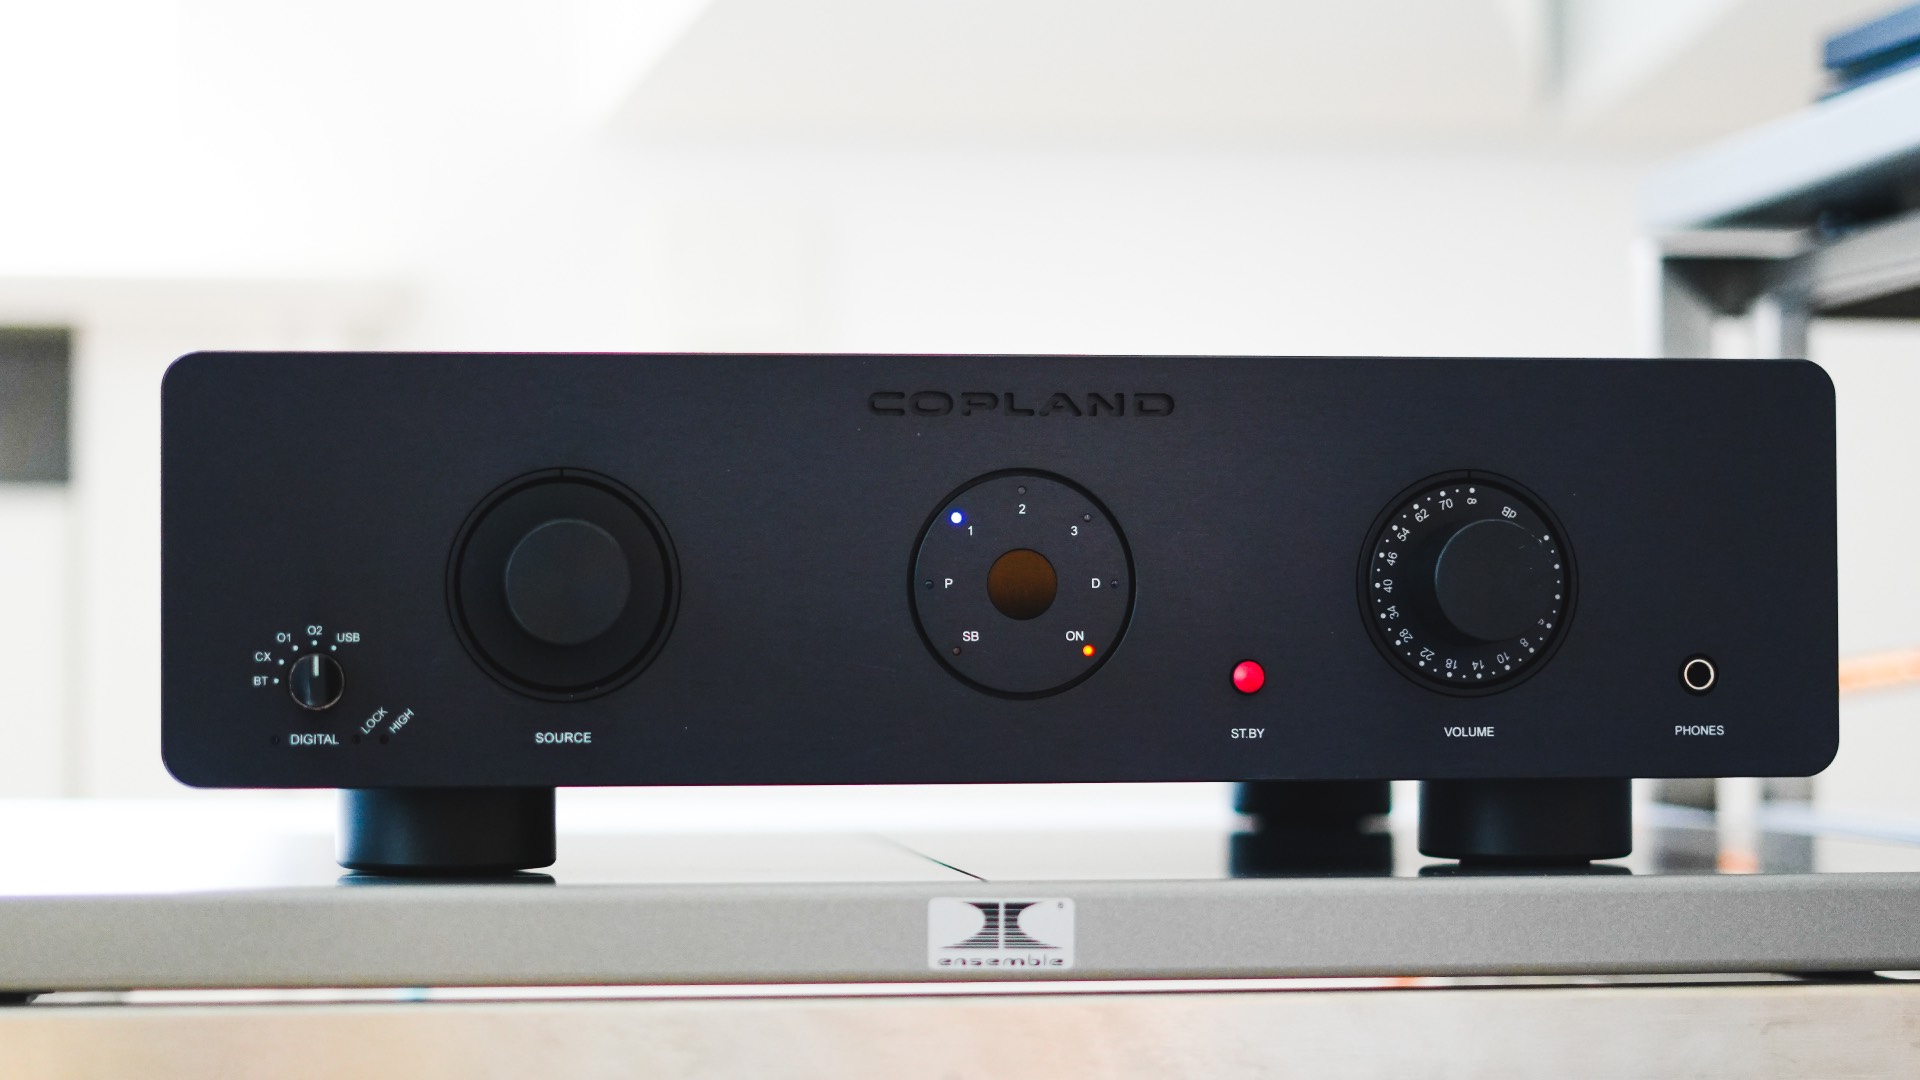 Integrated Amplifier Copland CSA 70 (Image Credit: Copland)